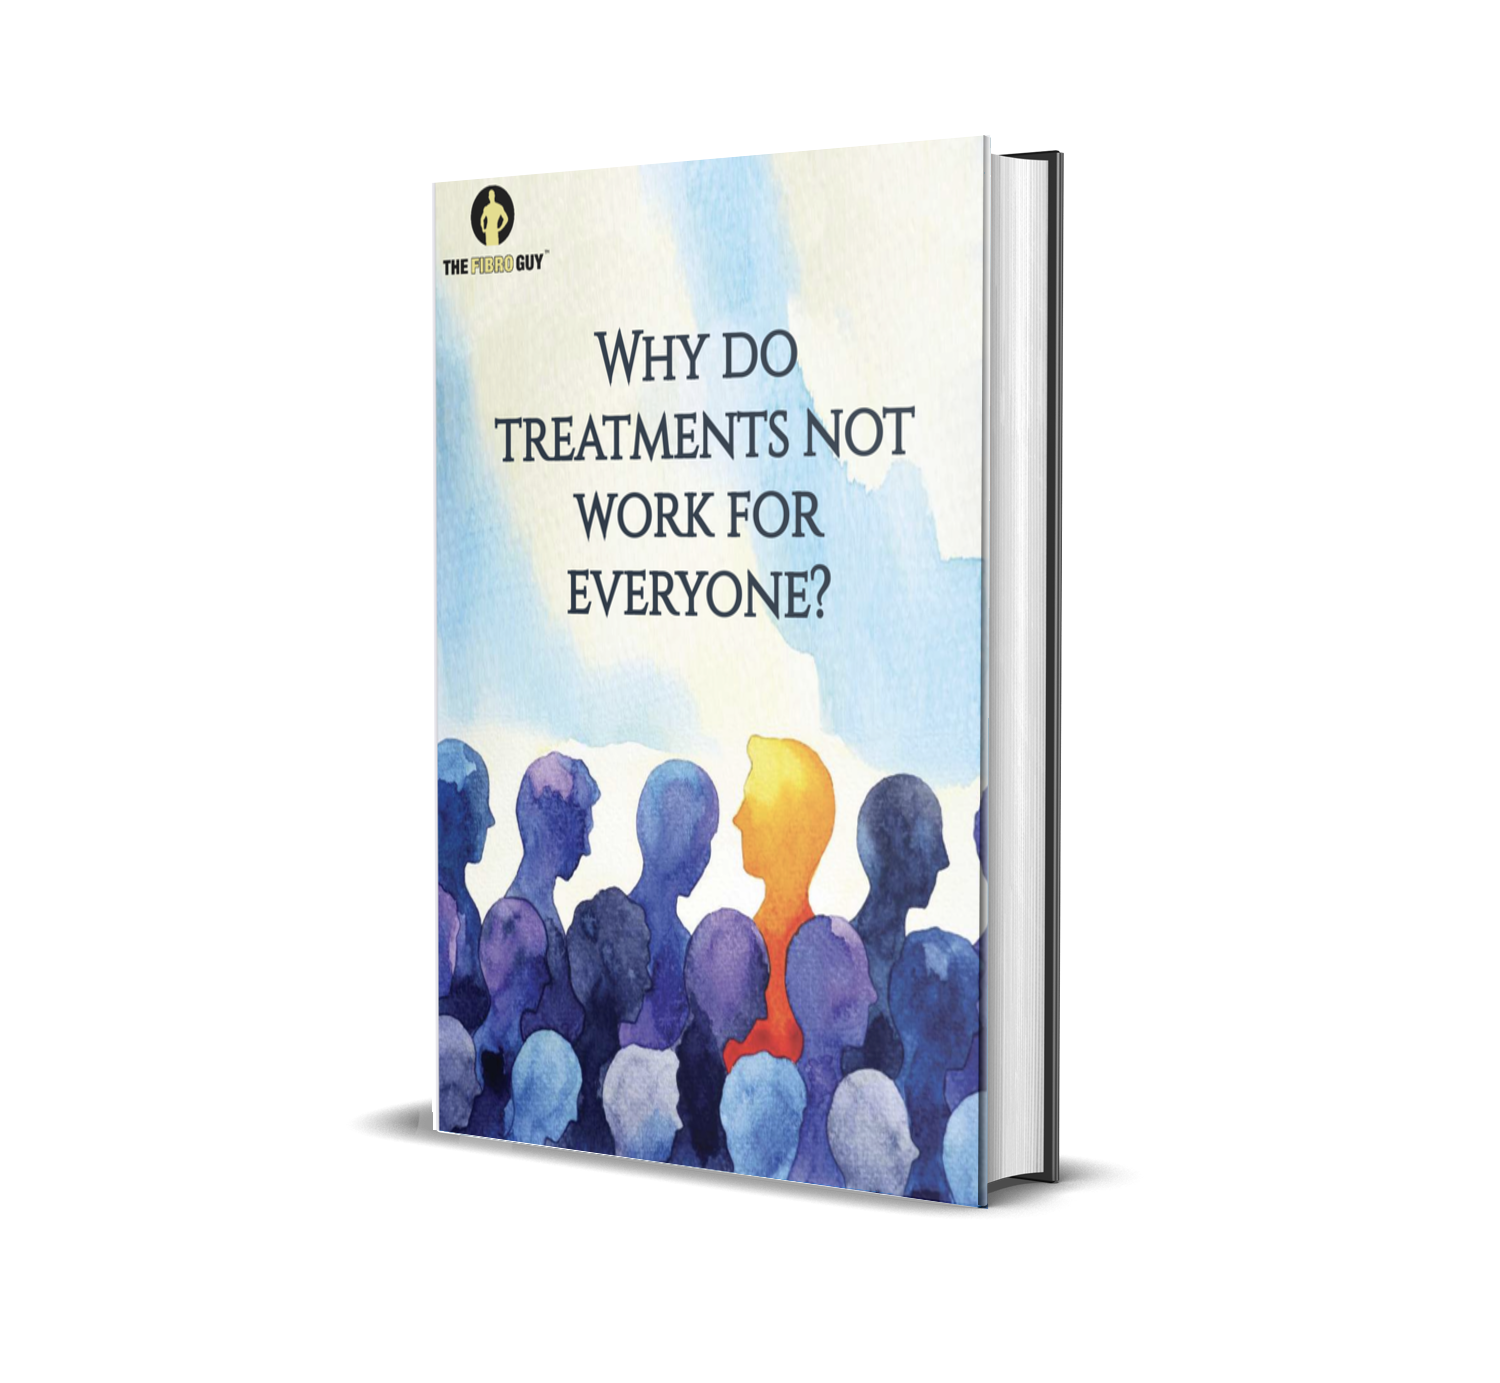 An ebook called "Why do treatments for everyone but me?"